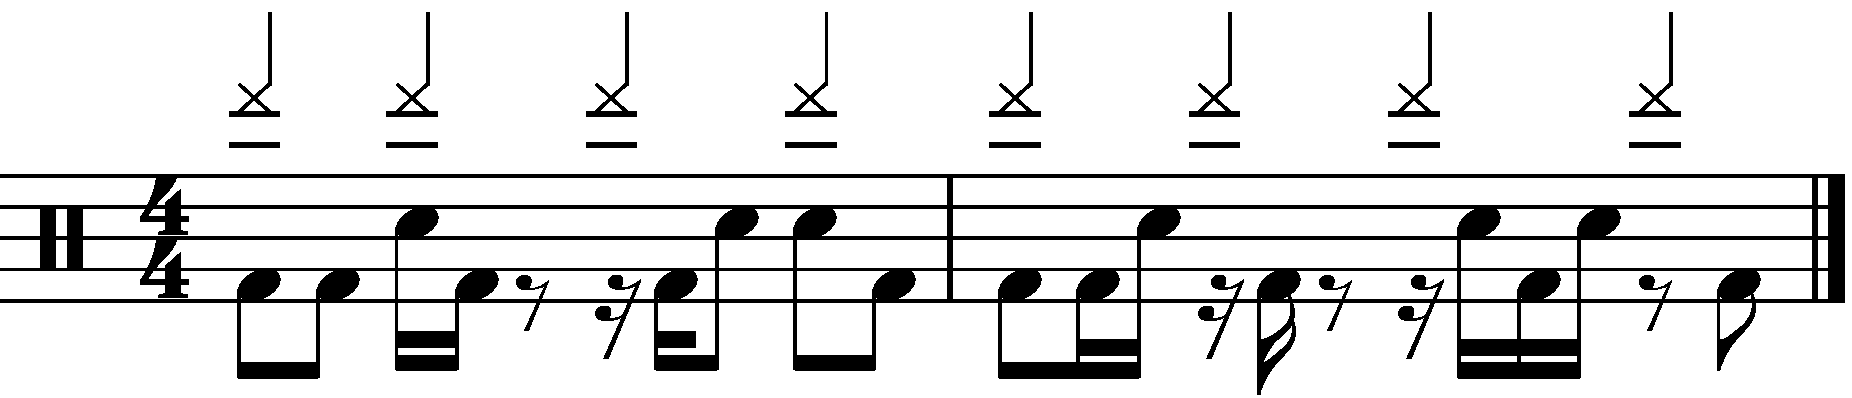 A two bar groove built around 16th note displacement